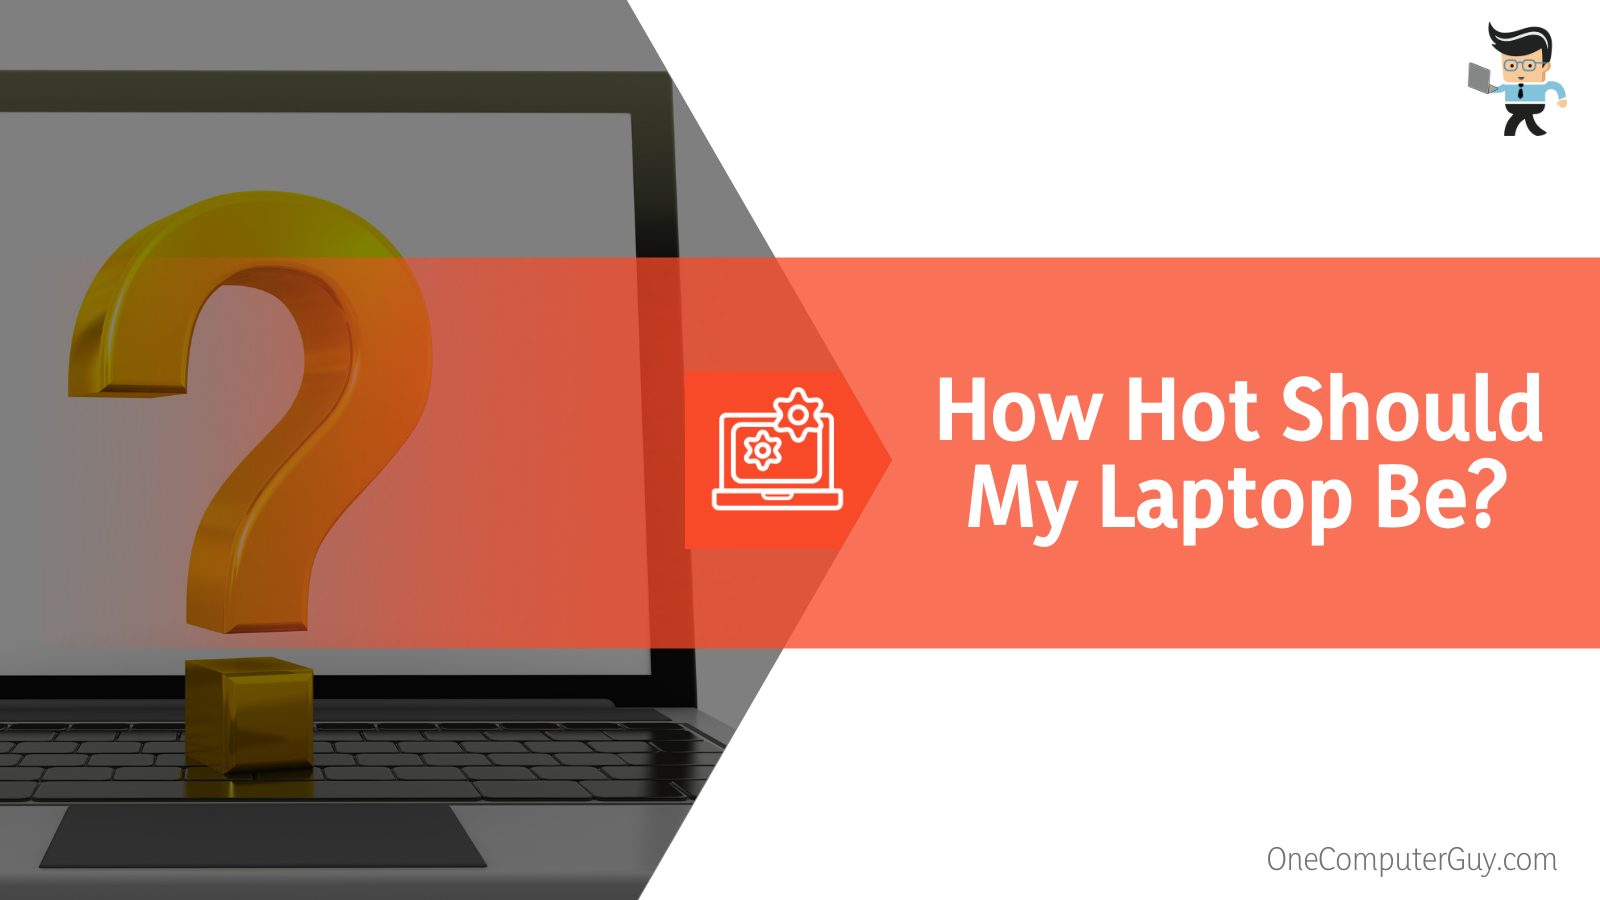 How Hot Should My Laptop Be